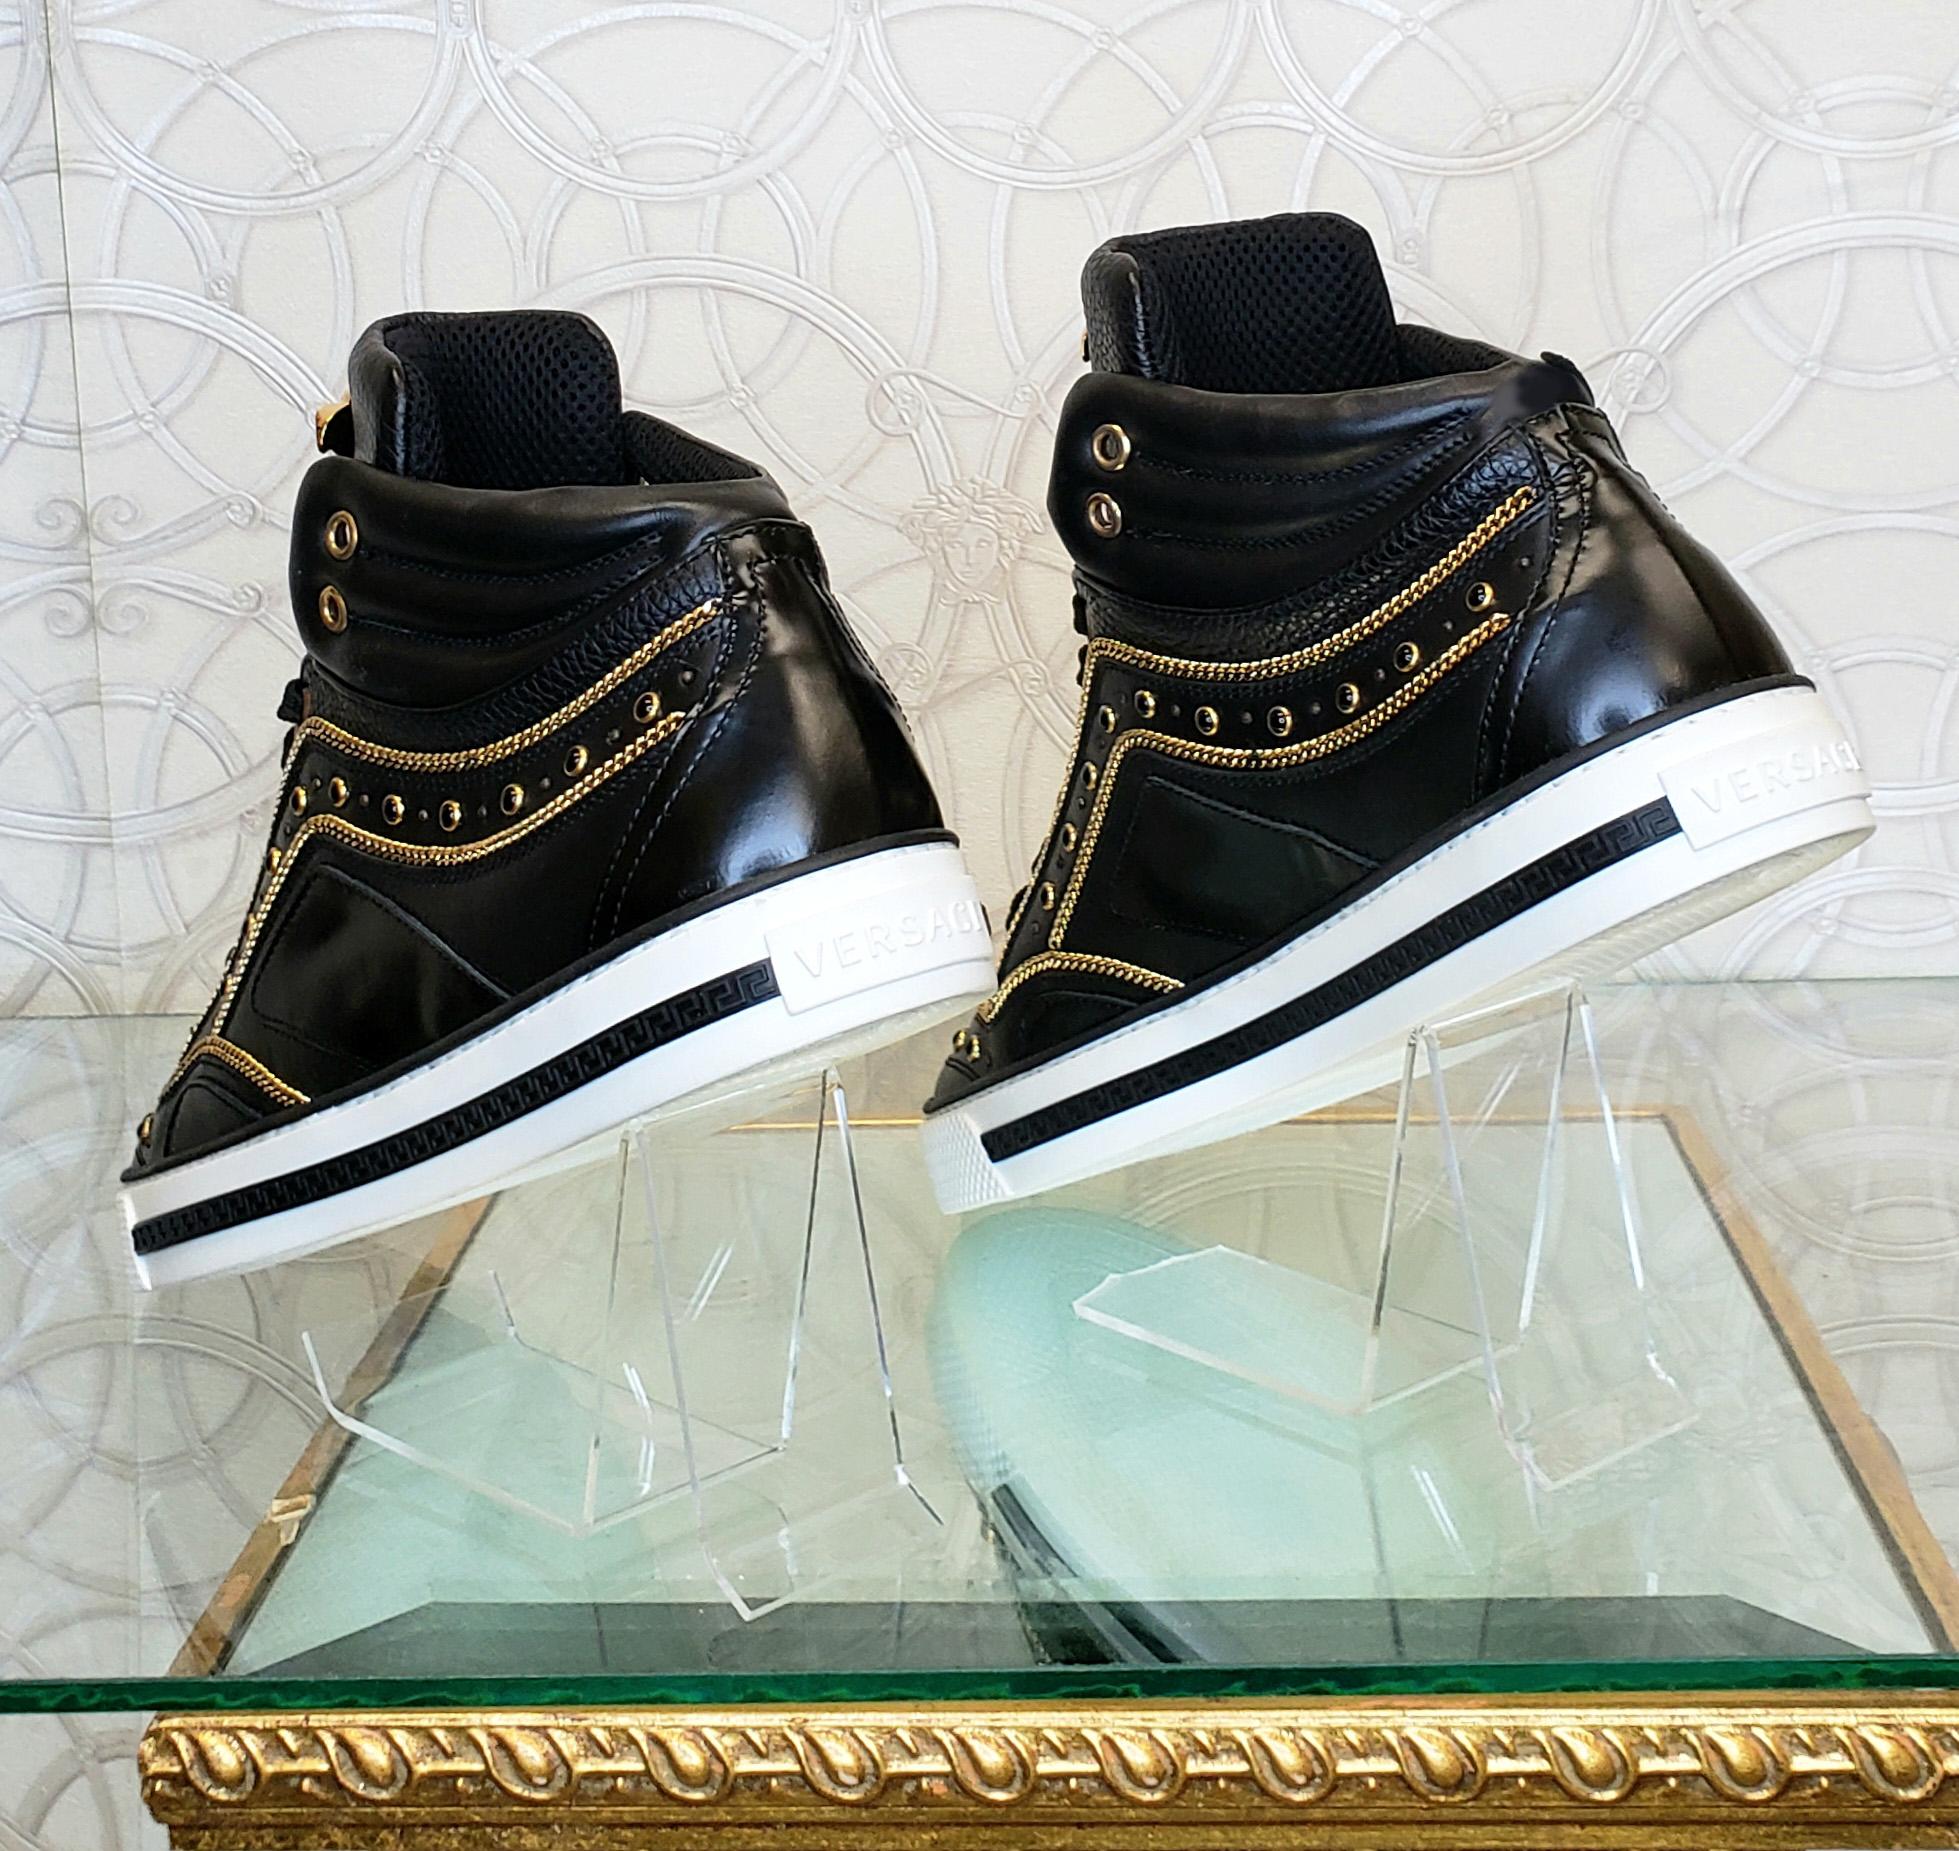 Men's NEW VERSACE STUDDED HIGH-TOP SNEAKERS with GOLD 3D MEDUSA BUCKLE SIZE 39 - 6